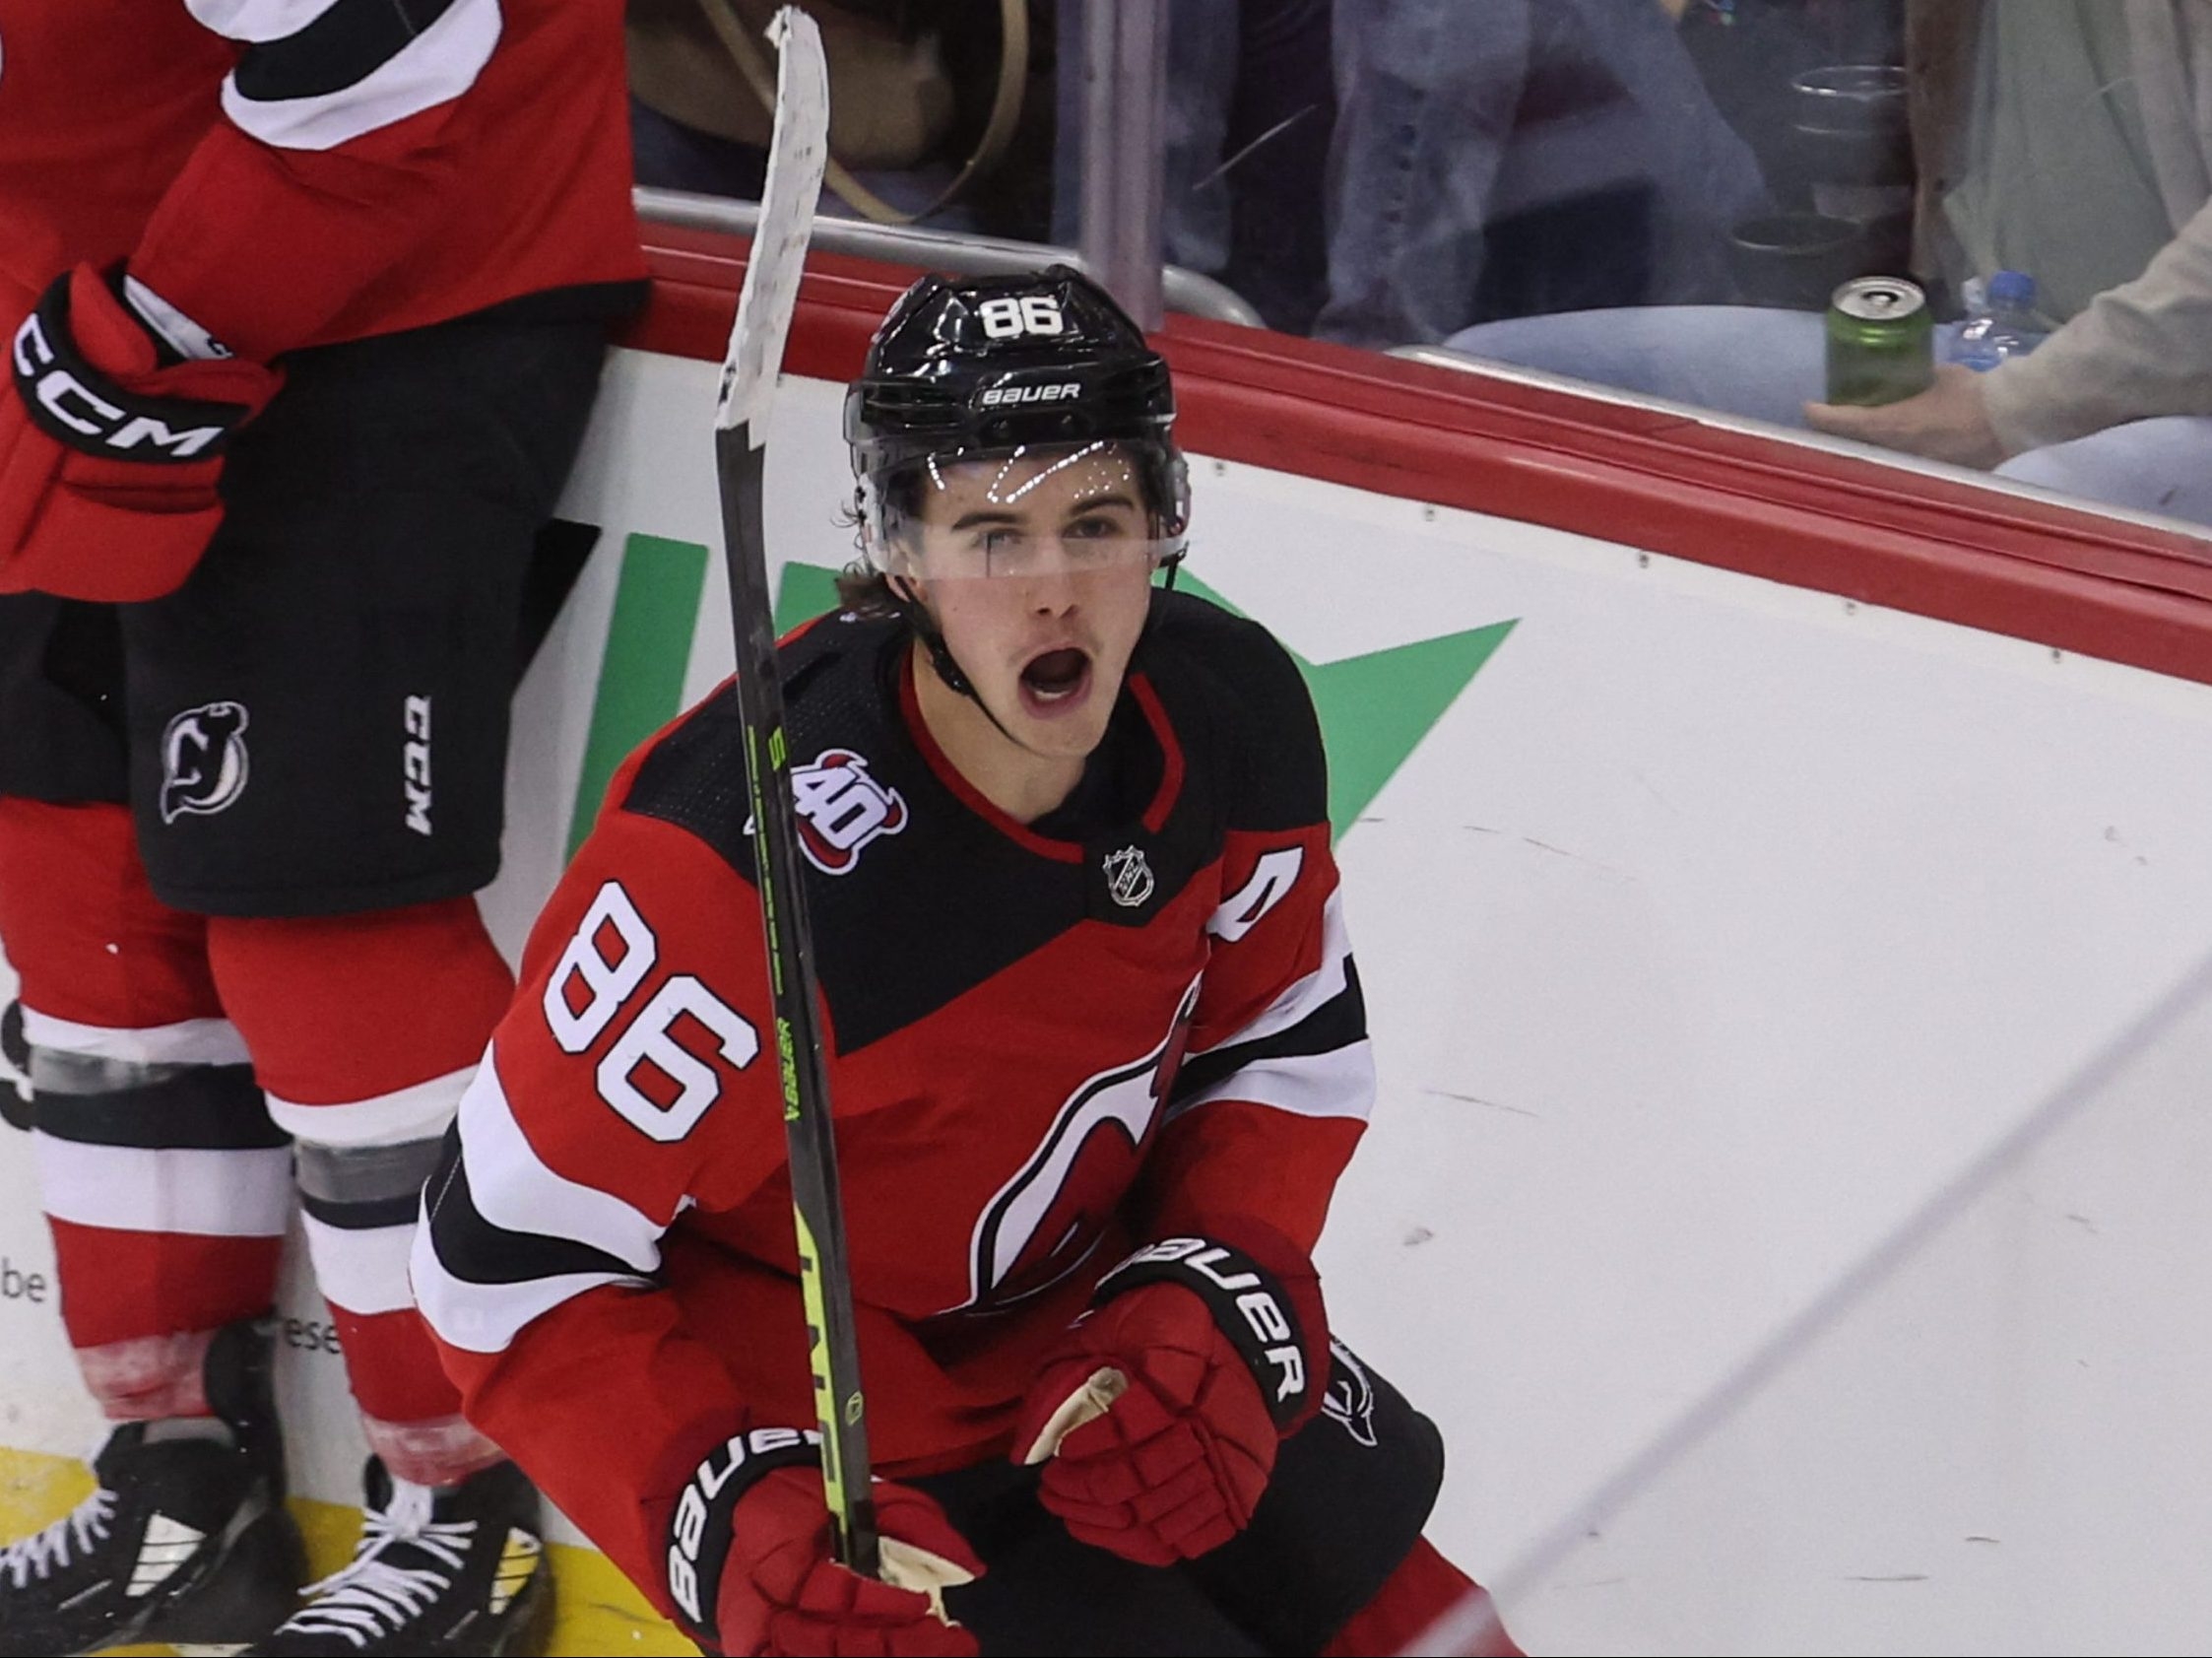 Jack Hughes scores 'first goal' as a New Jersey Devil in